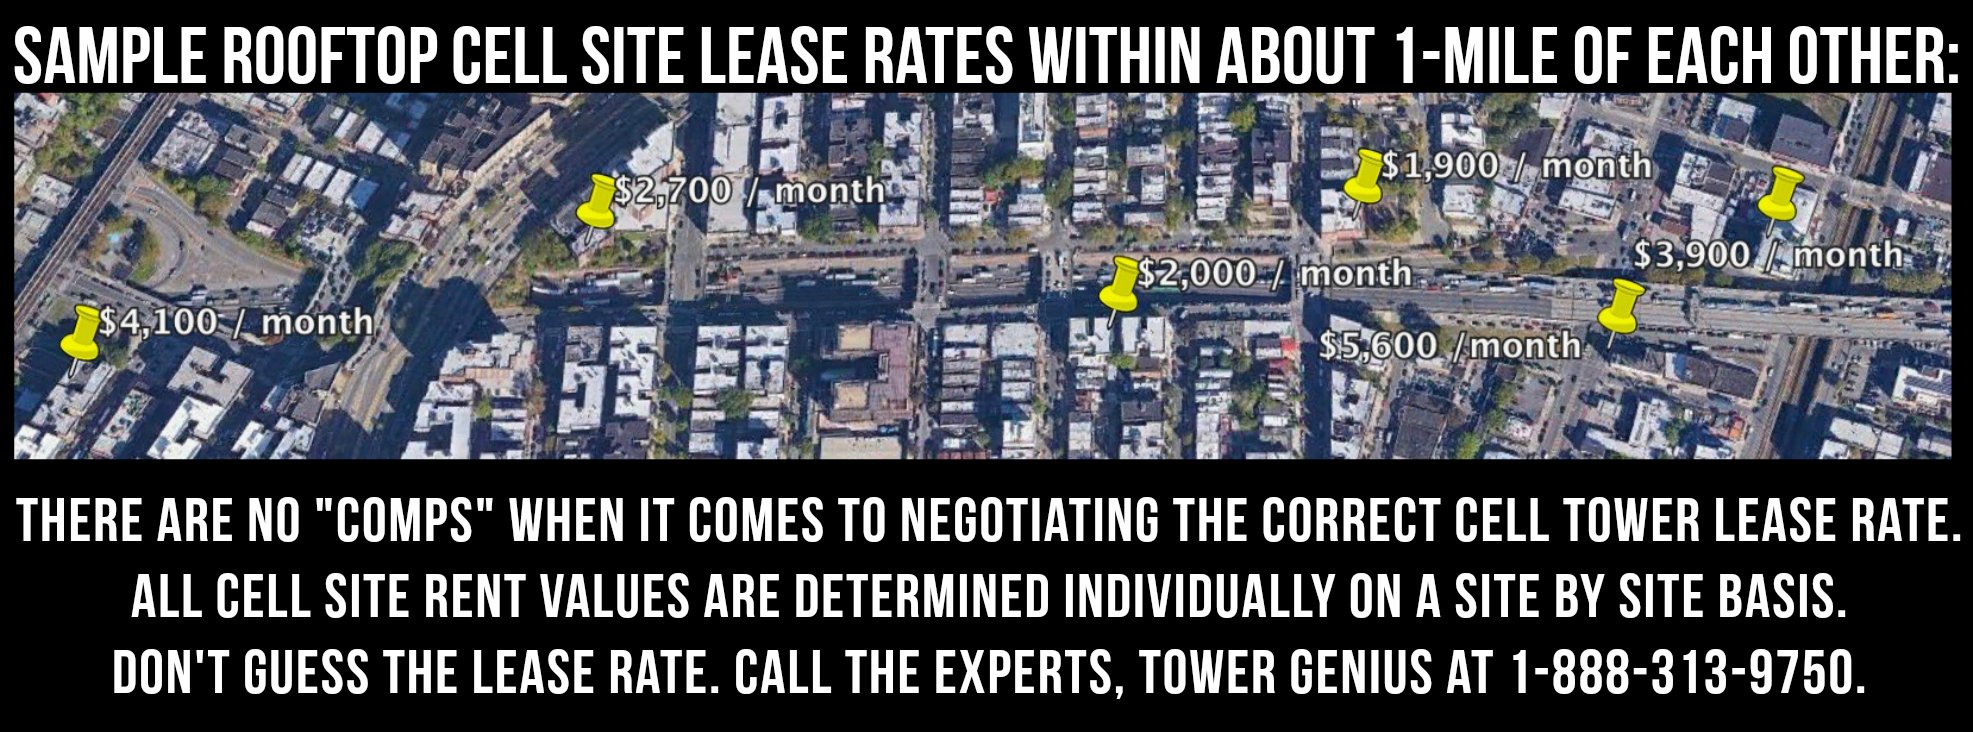 average cell tower lease rates